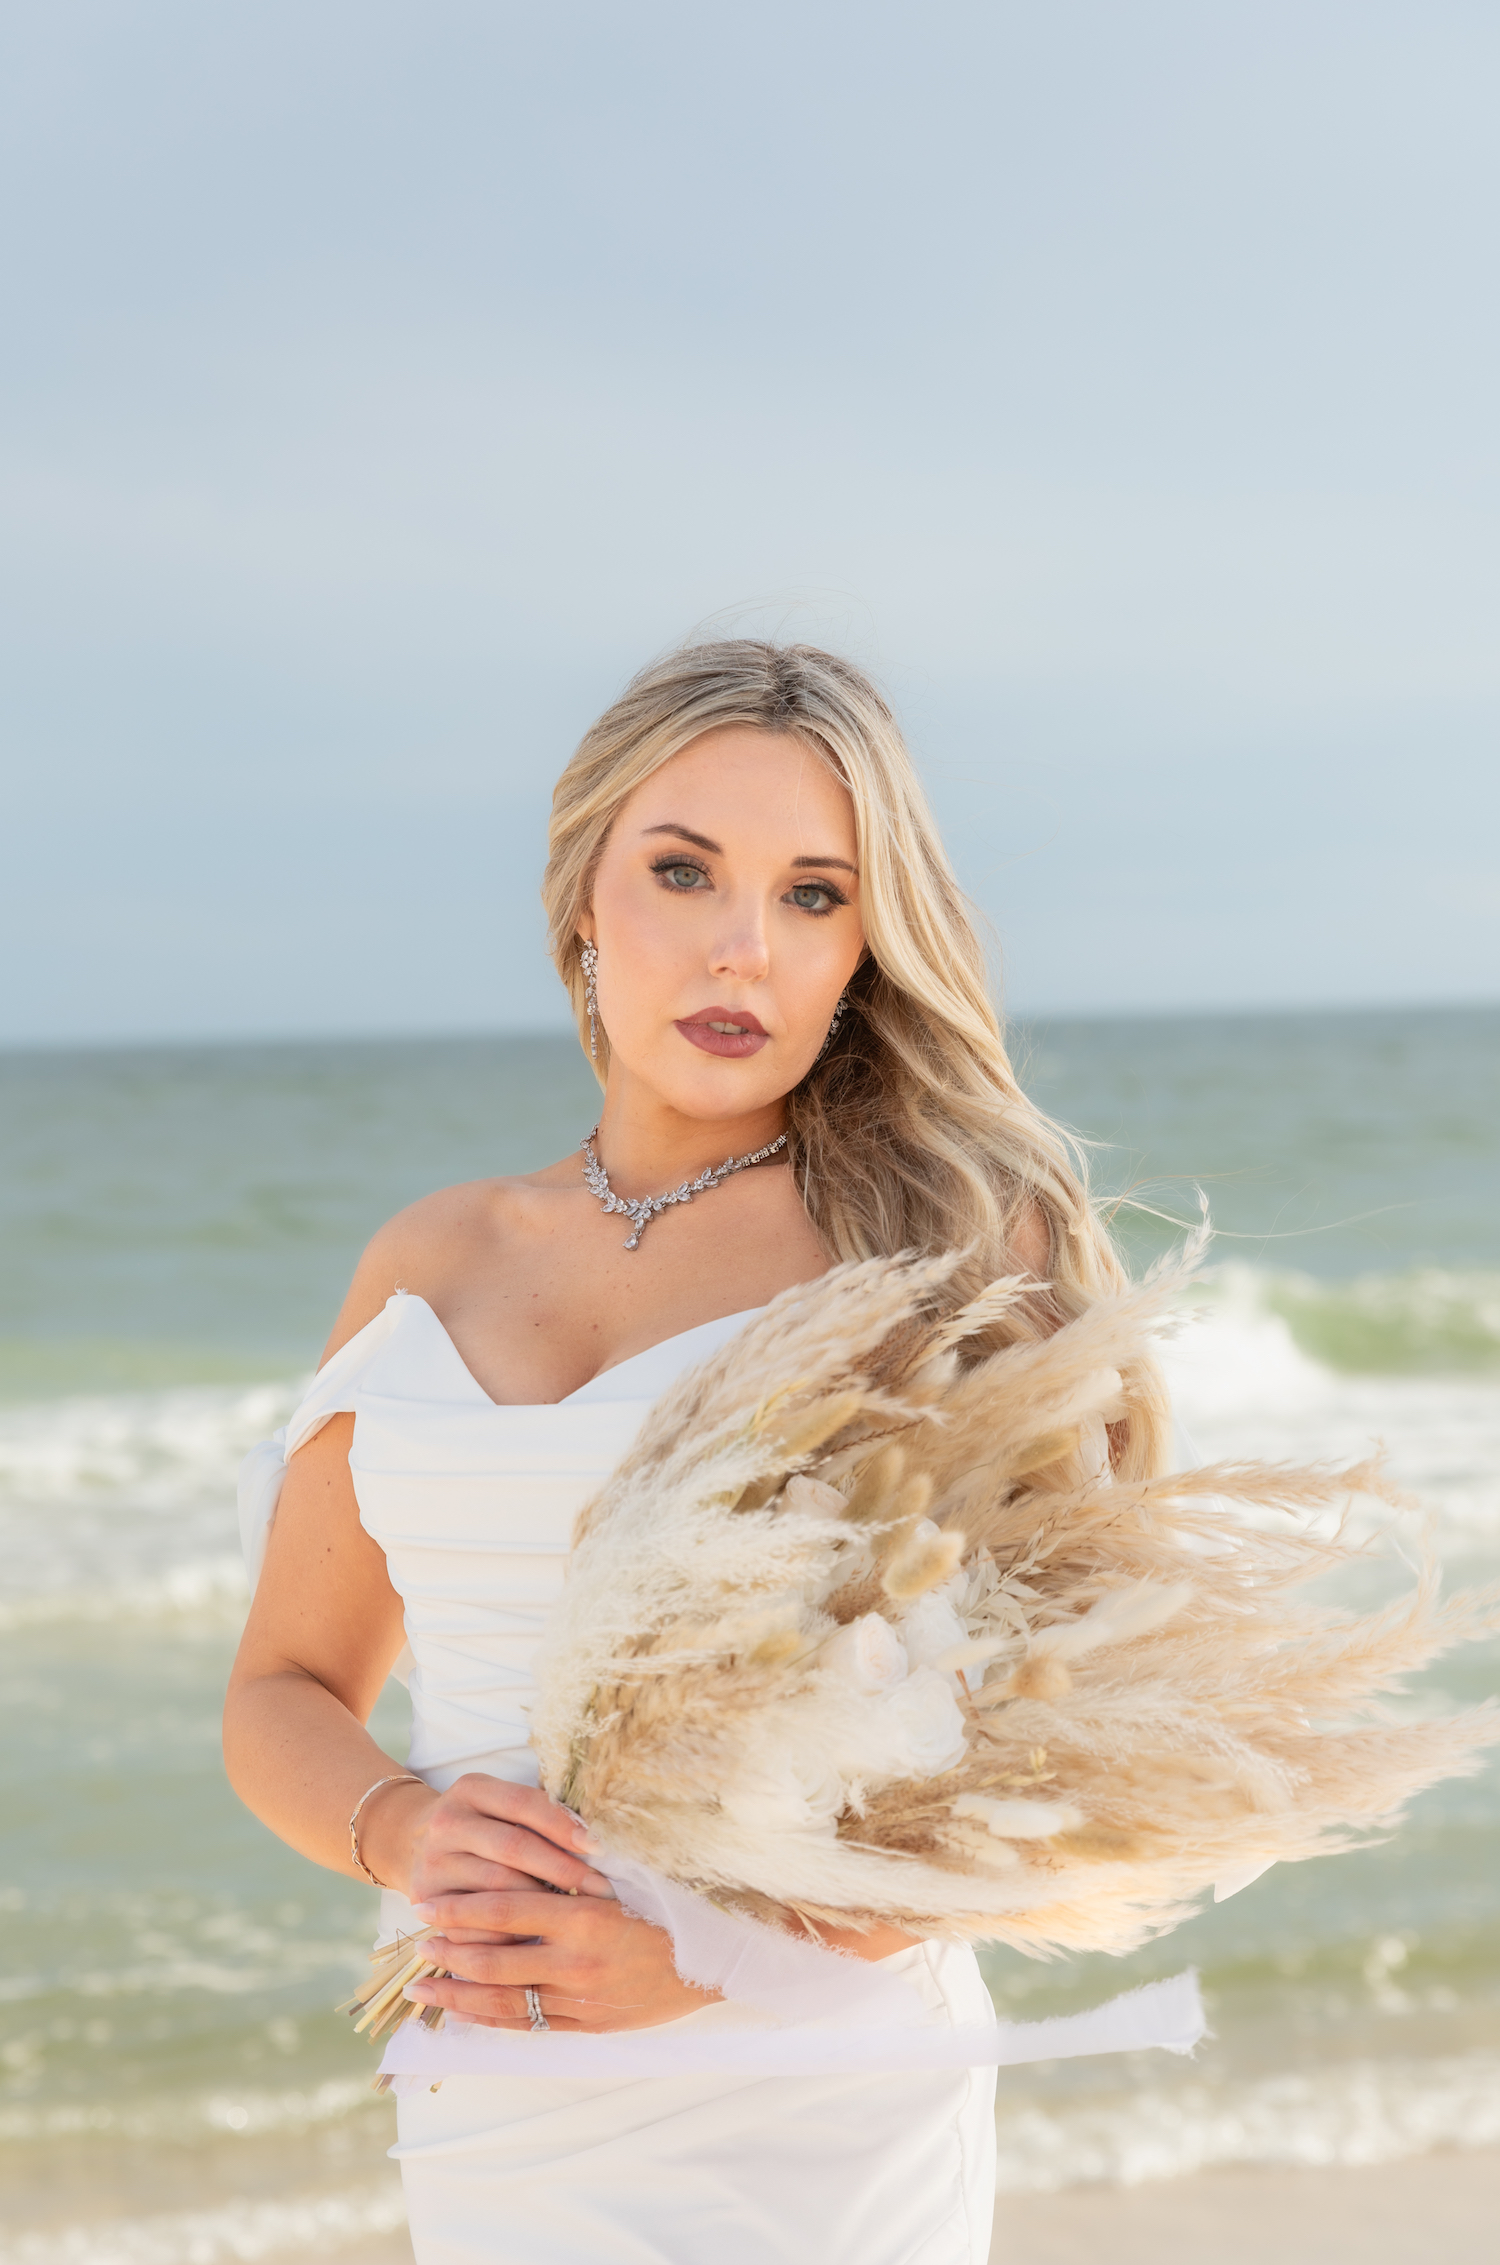 Gulf Shores and Orange Beach Weddings are booking now